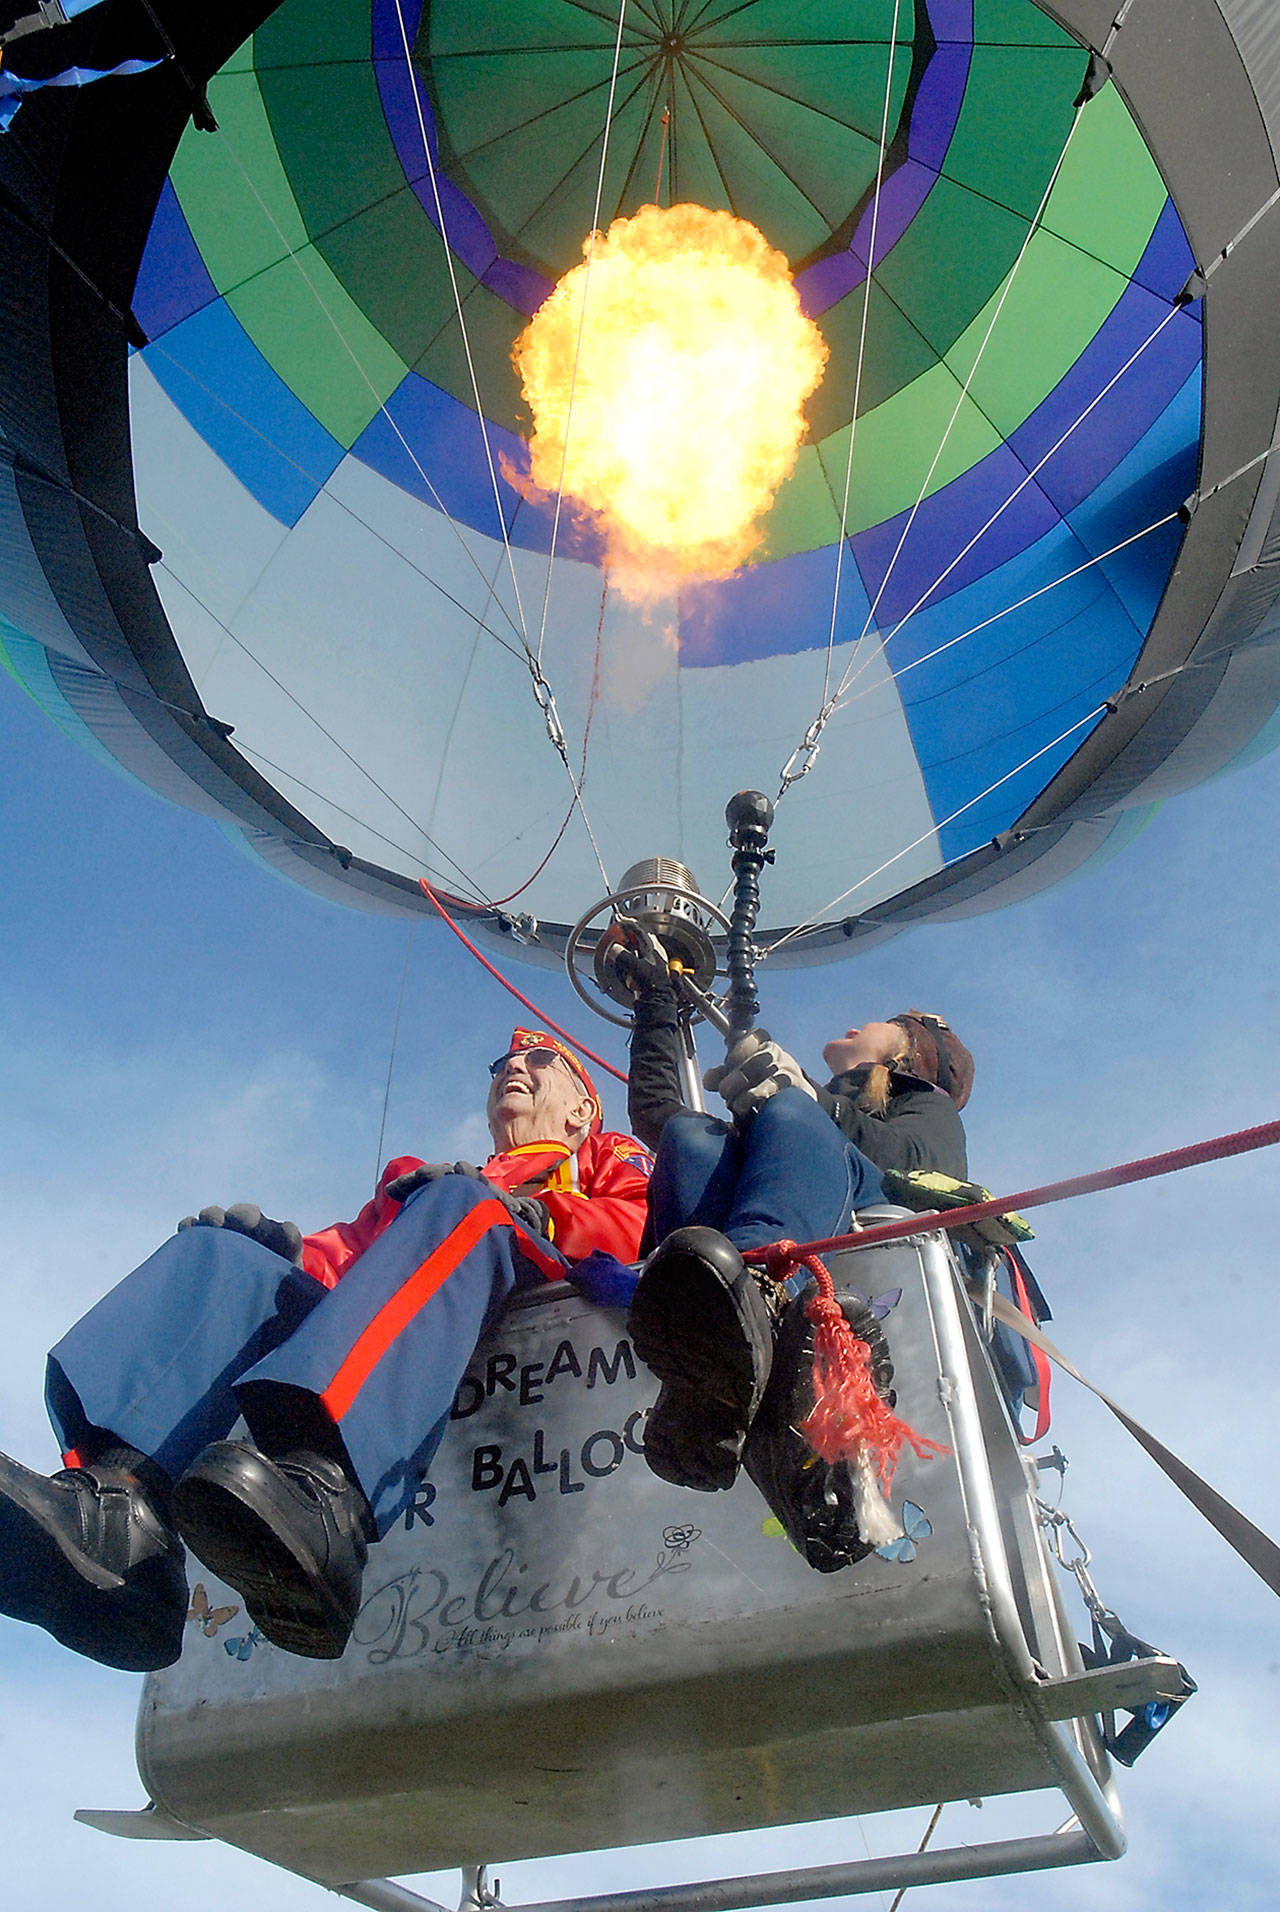 Tom McKeown, 95, of Port Angeles, a U.S. Marine Corps veteran of World War II, takes a tethered balloon ride with Capt. Crystal Stout, executive director of Dream Catcher Balloon, at Sequim Valley Airport in 2018. File photo by Keith Thorpe/Peninsula Daily News